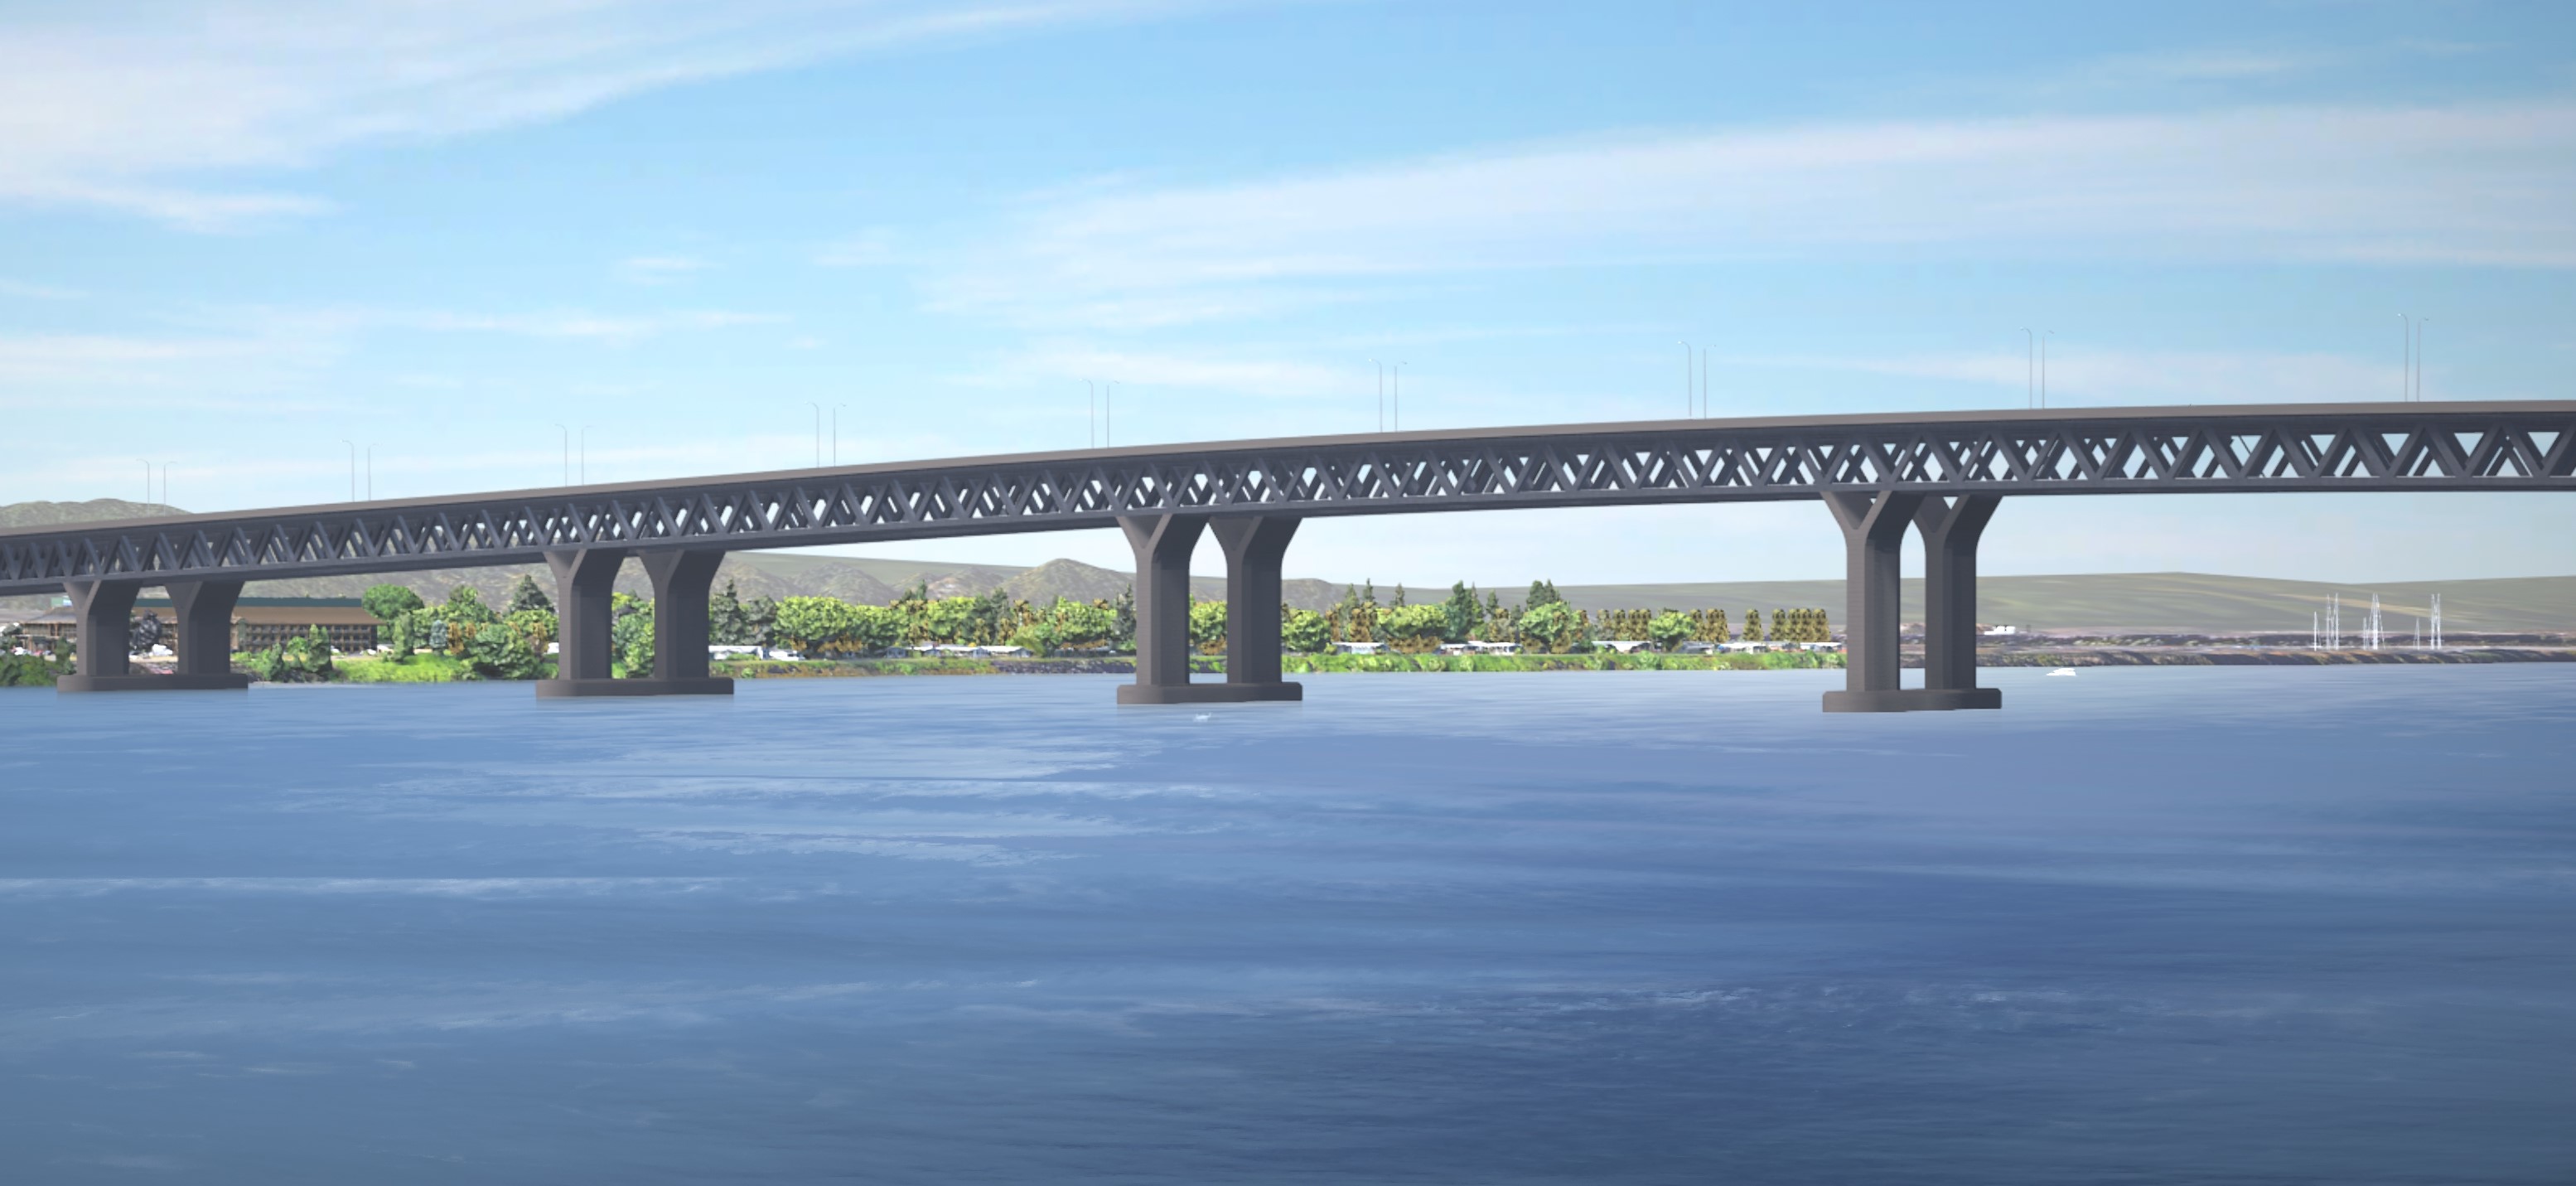 3d rendering of a stacked bridge spanning the Columbia River